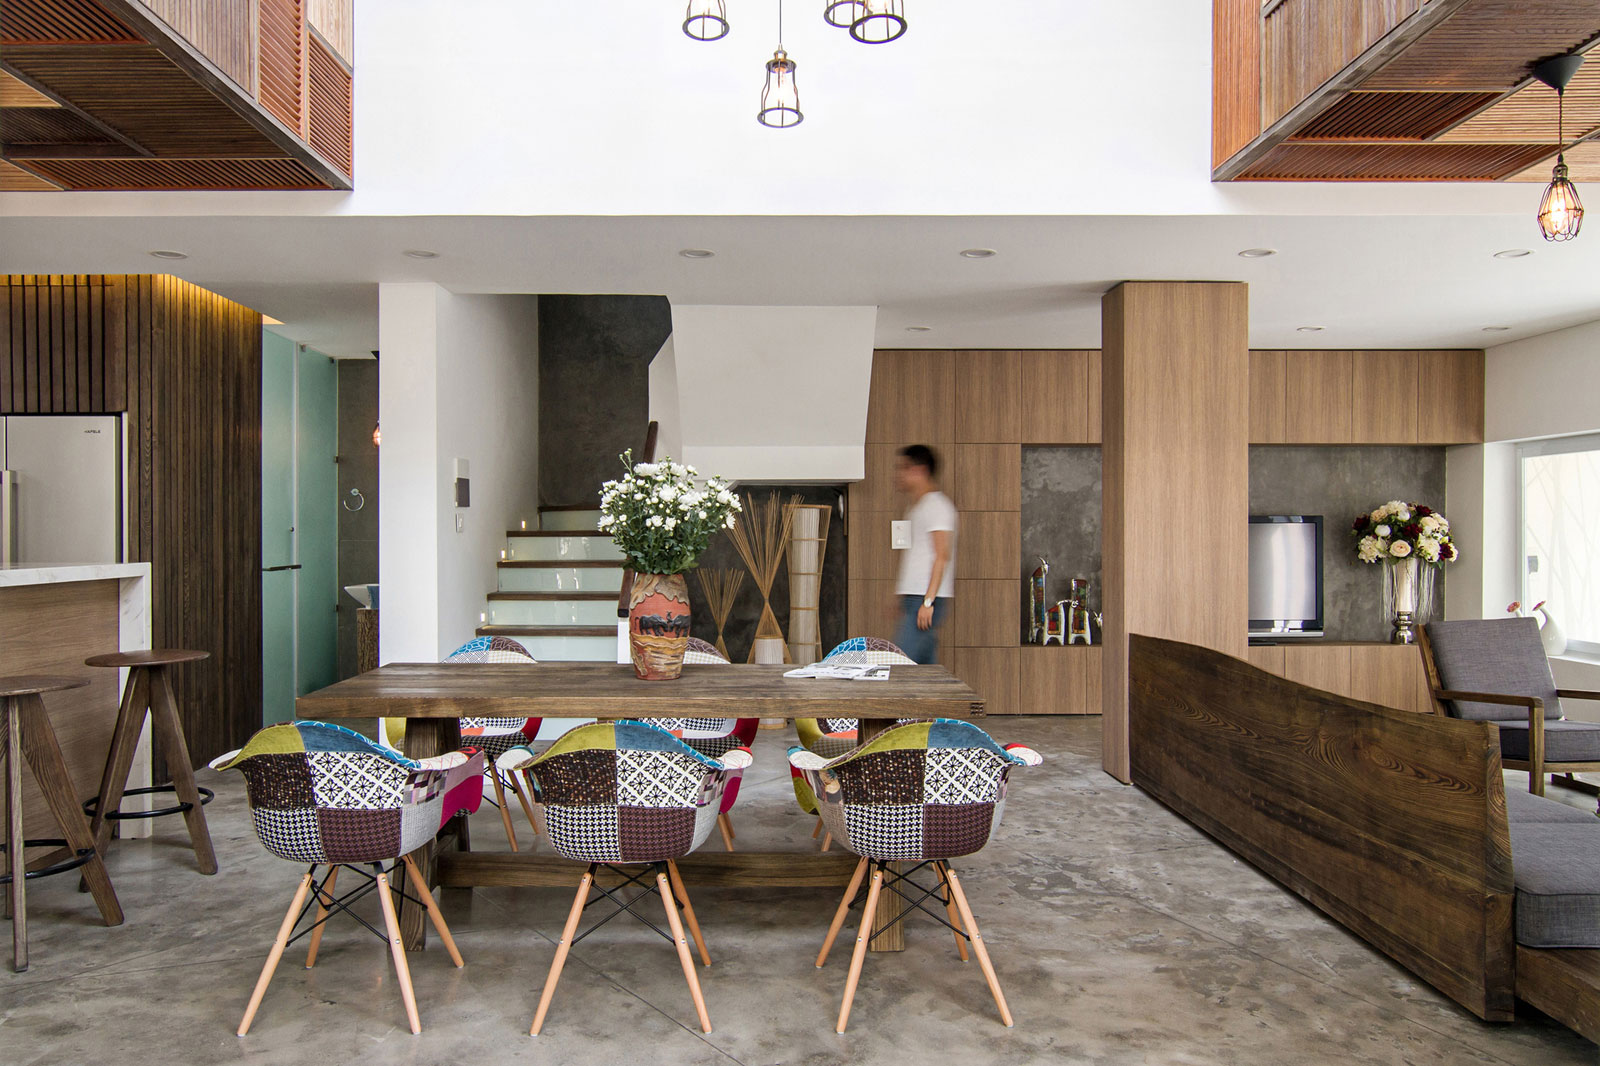 EPV Semi-Detached House Located in Ecopark Green Urban Area, Vietnam by AHL architects associates-10